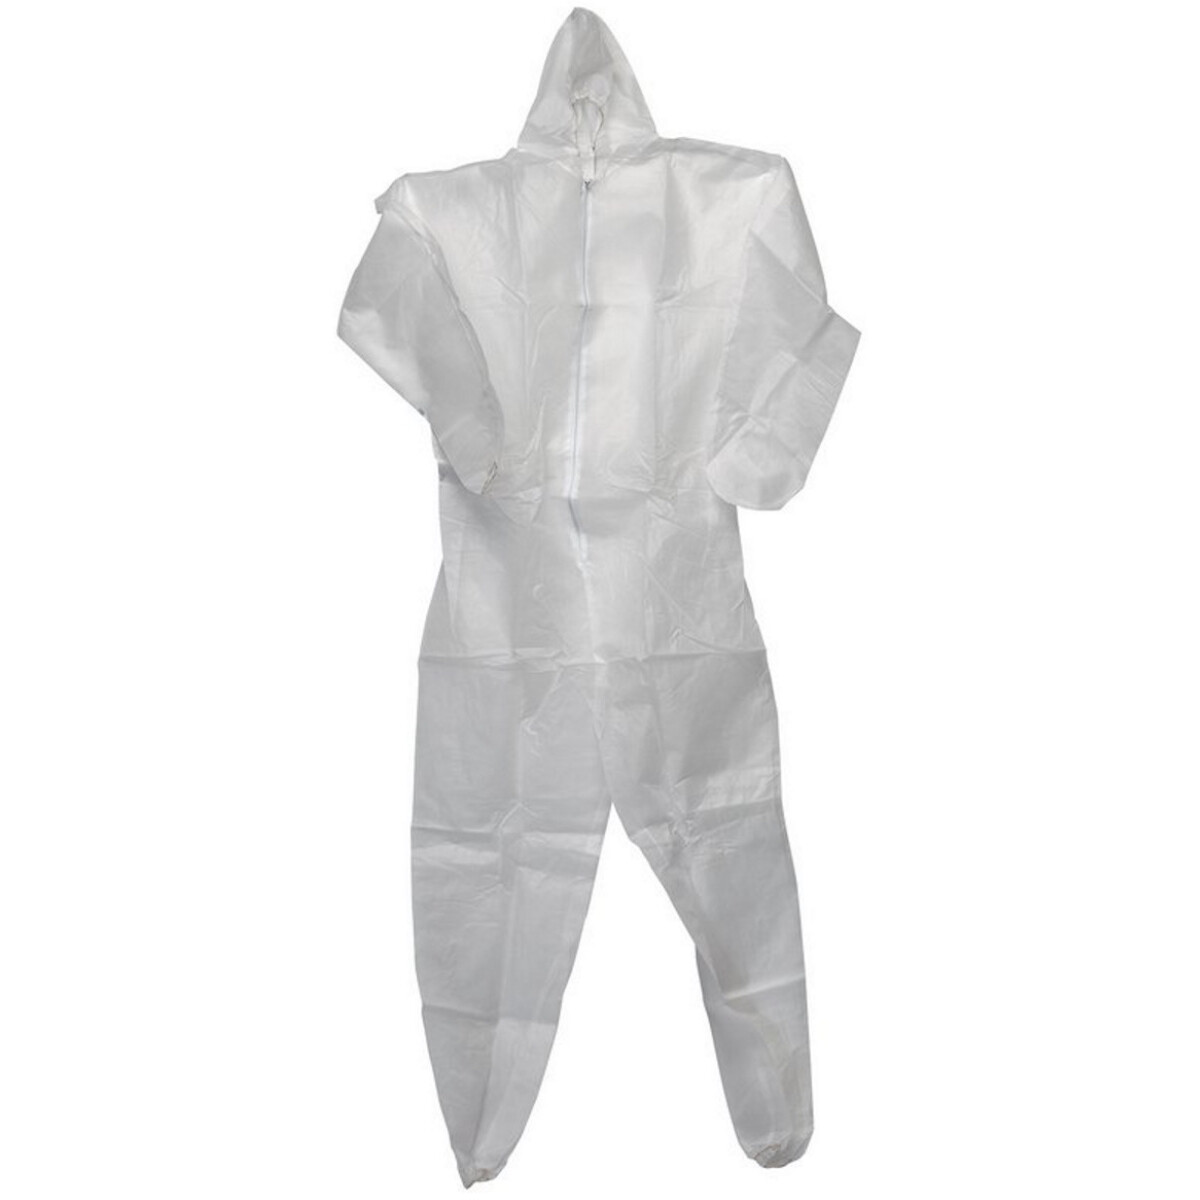 Draper 35812 DO/A2 Disposable Coverall XL from Lawson HIS